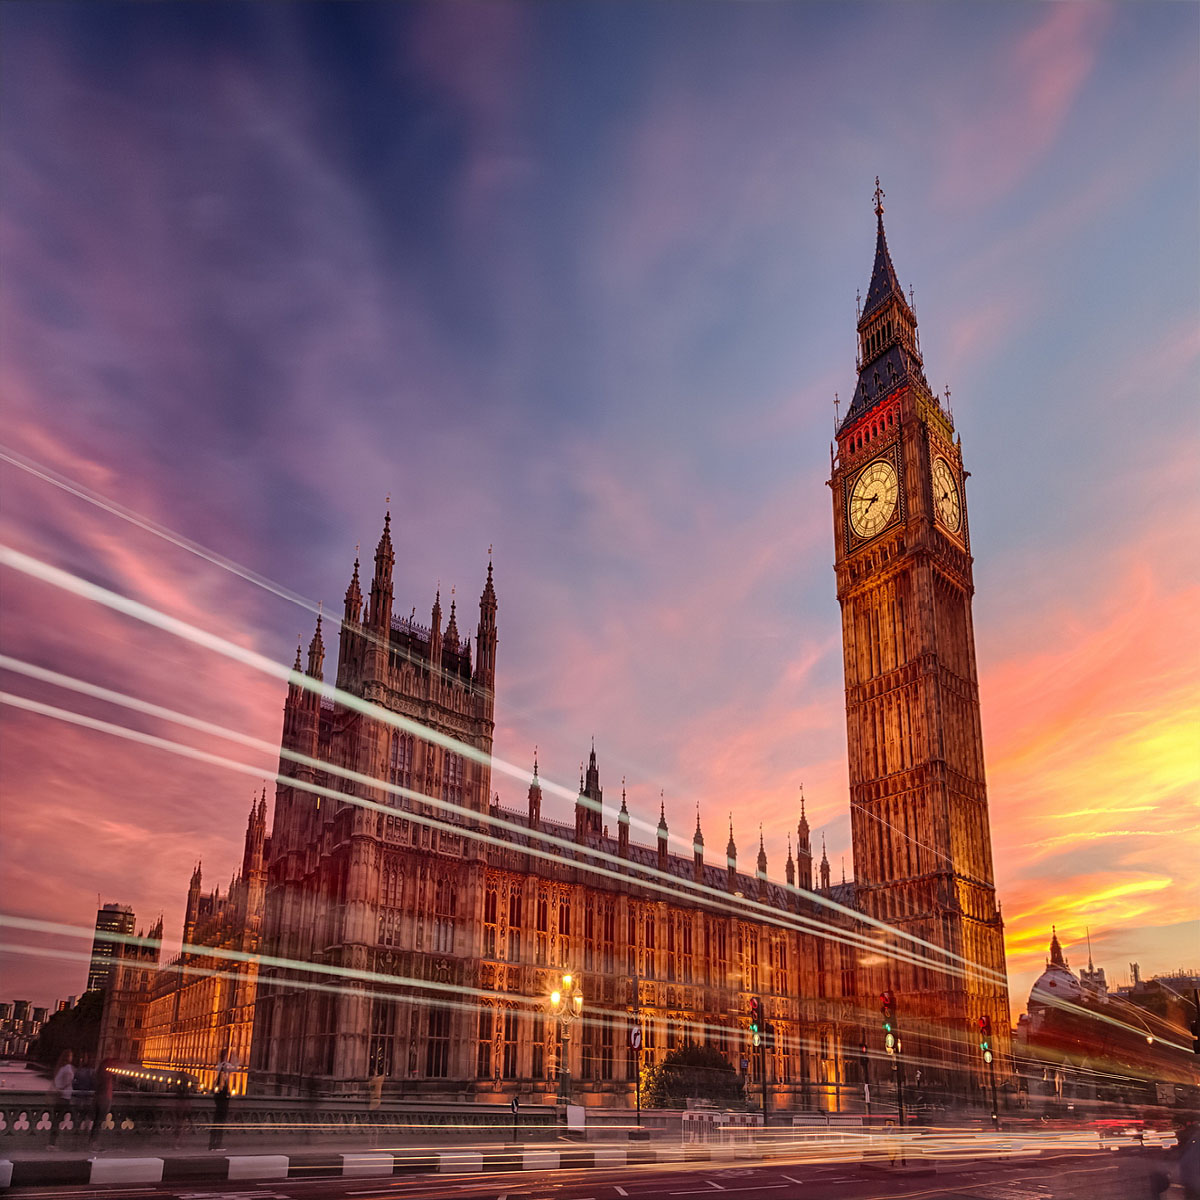 8-things-to-see-in-london-when-studying-abroad-studentuniverse-uk-blog